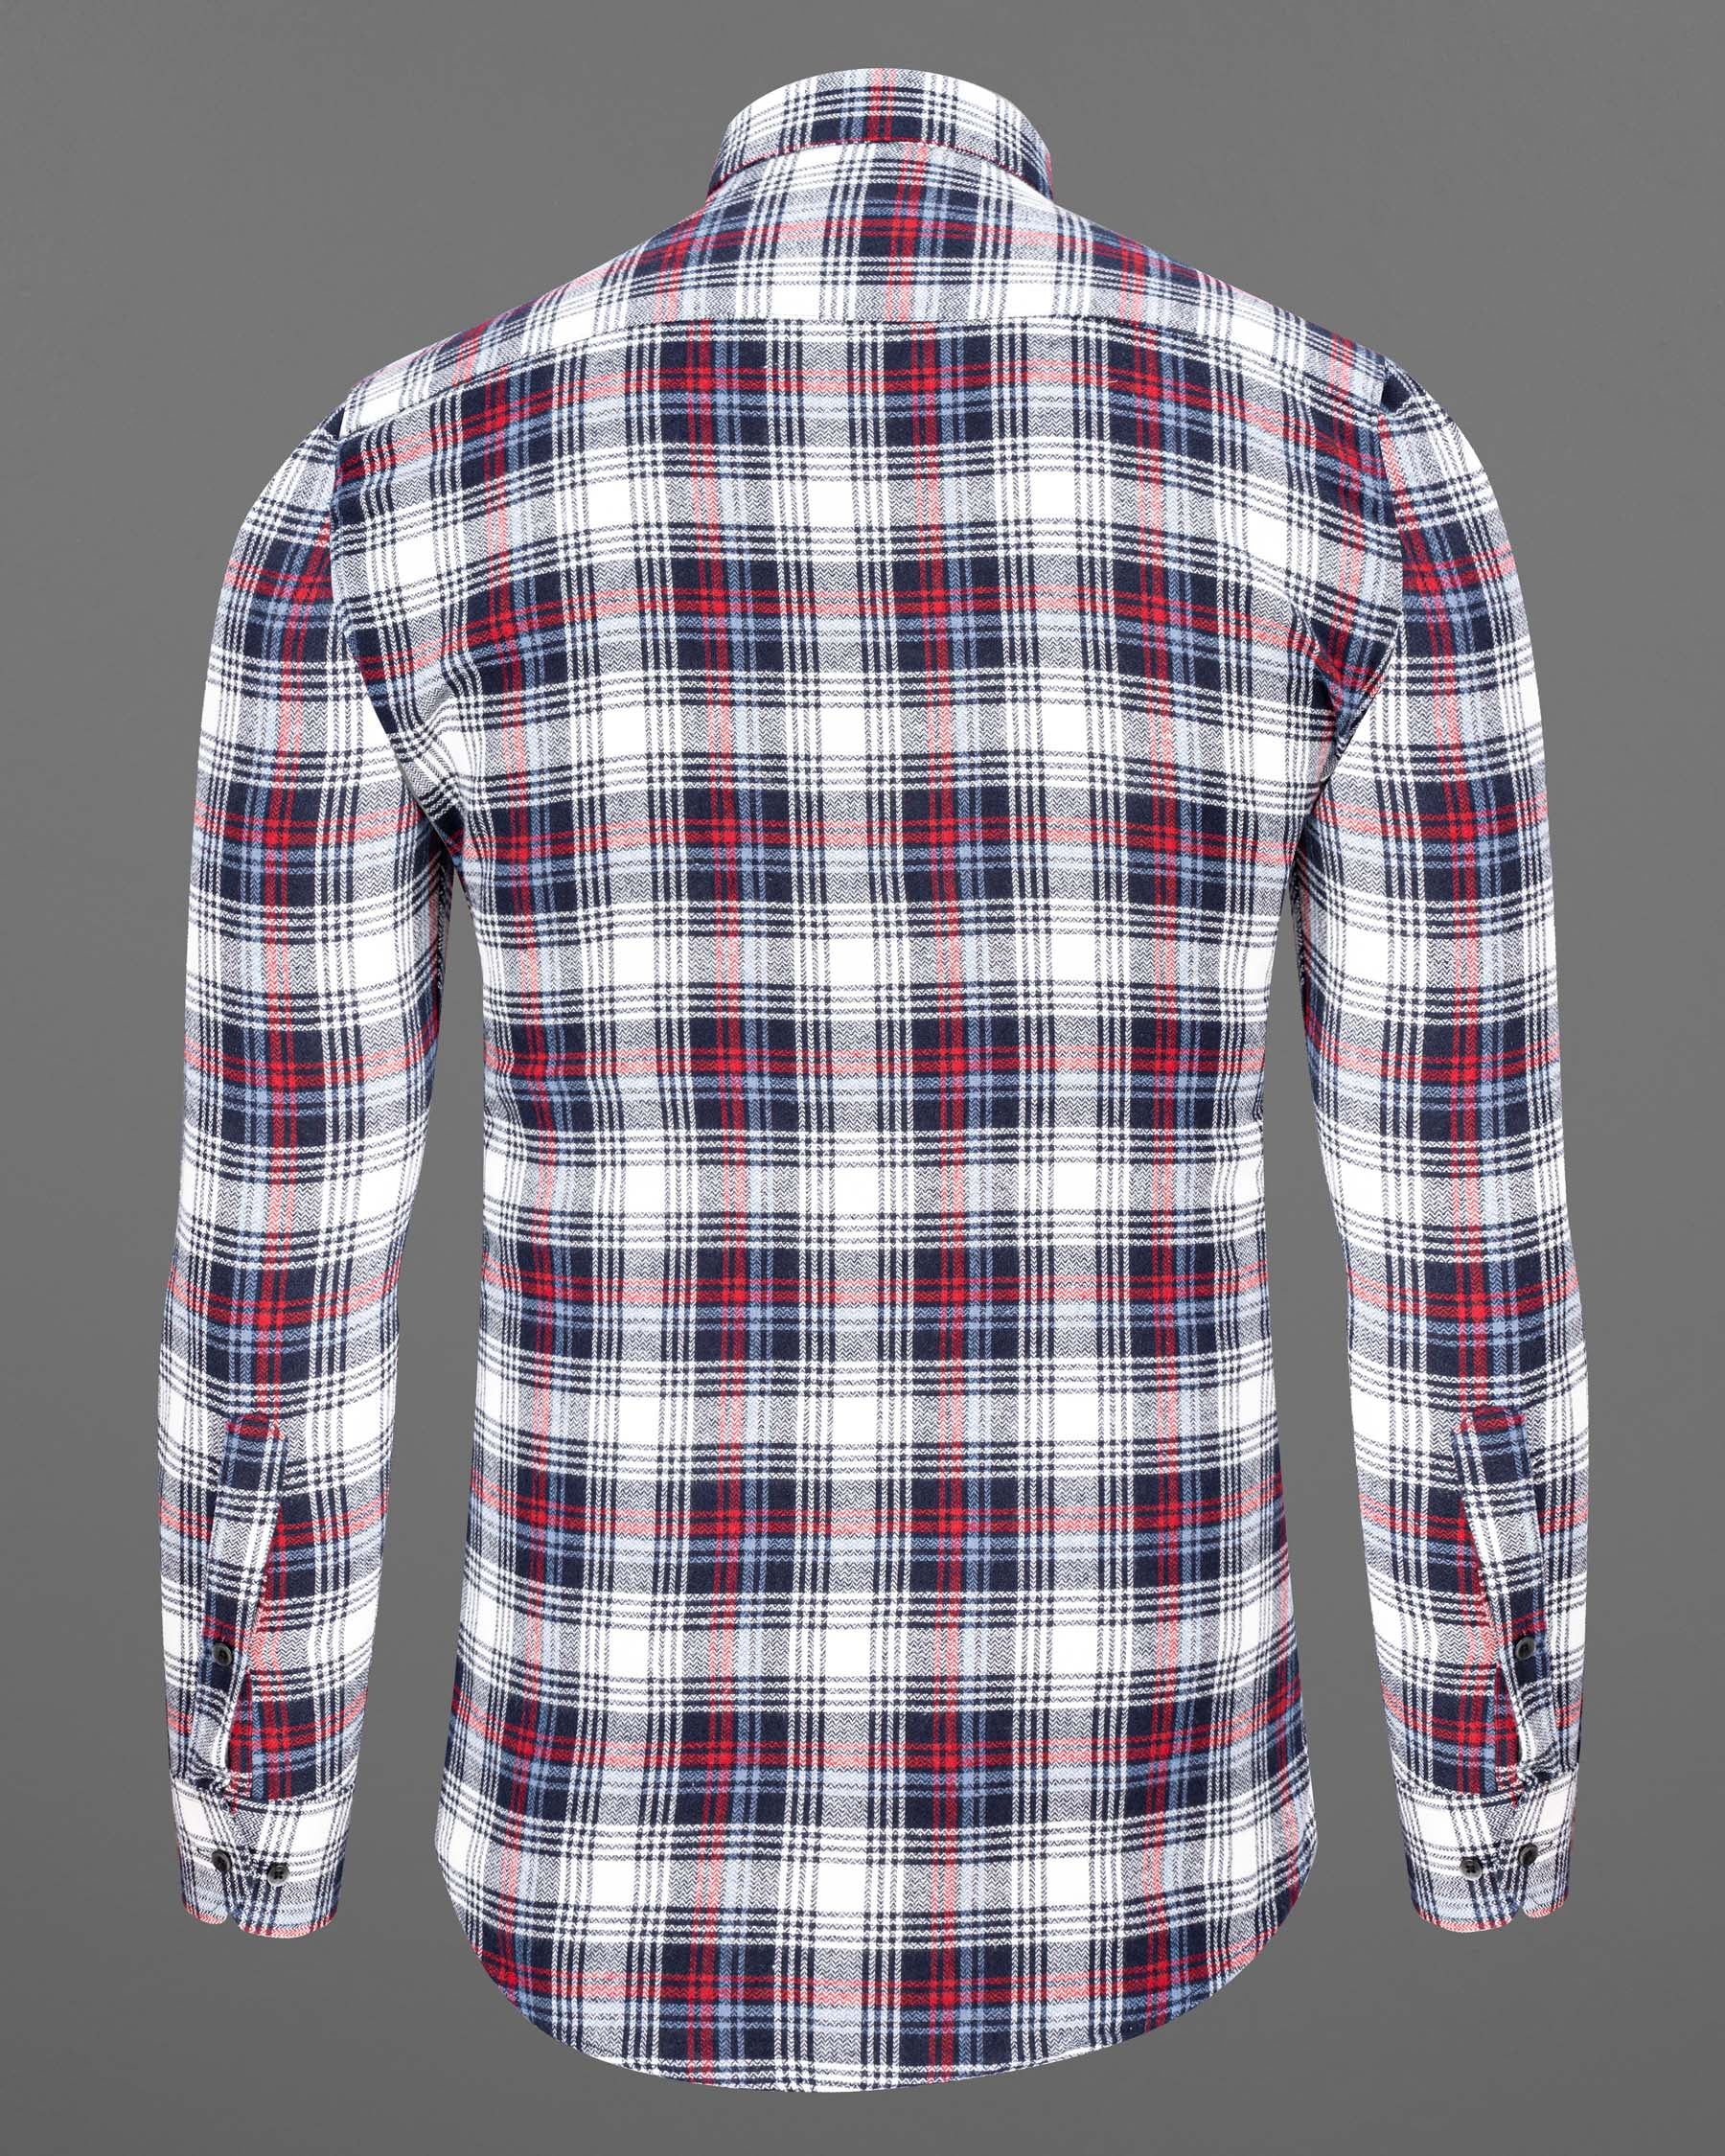 Bright White with Jagger Blue and Cardinal Red Plaid Flannel Shirt